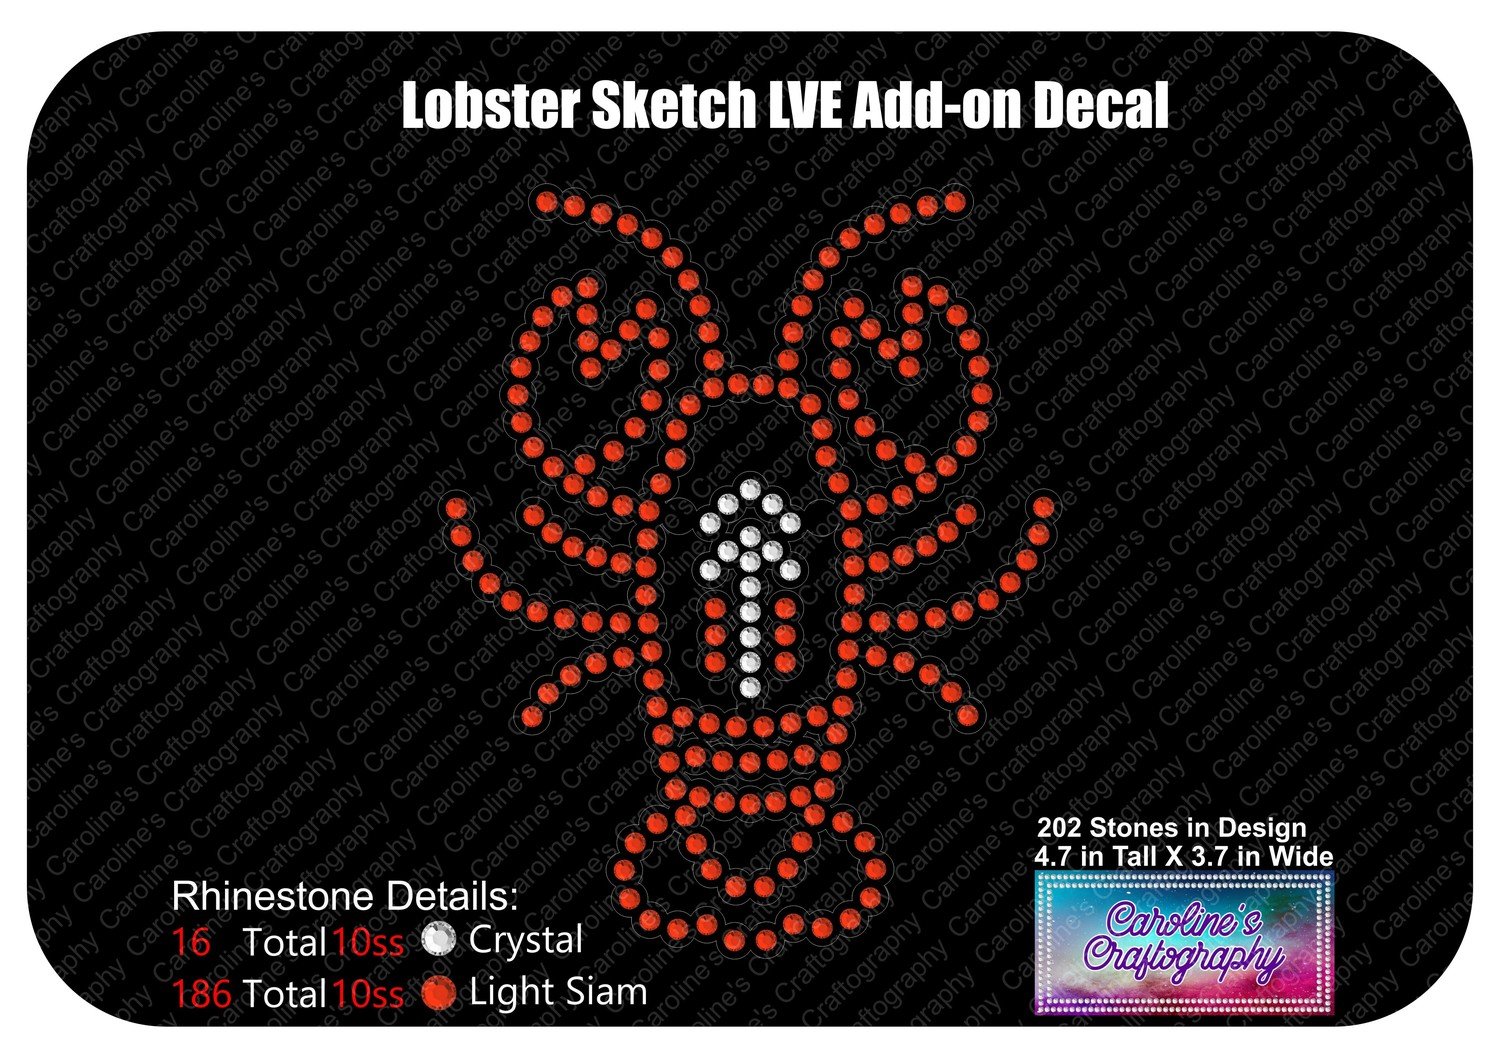 Lobster Sketch LVE Add-on Decal Stone